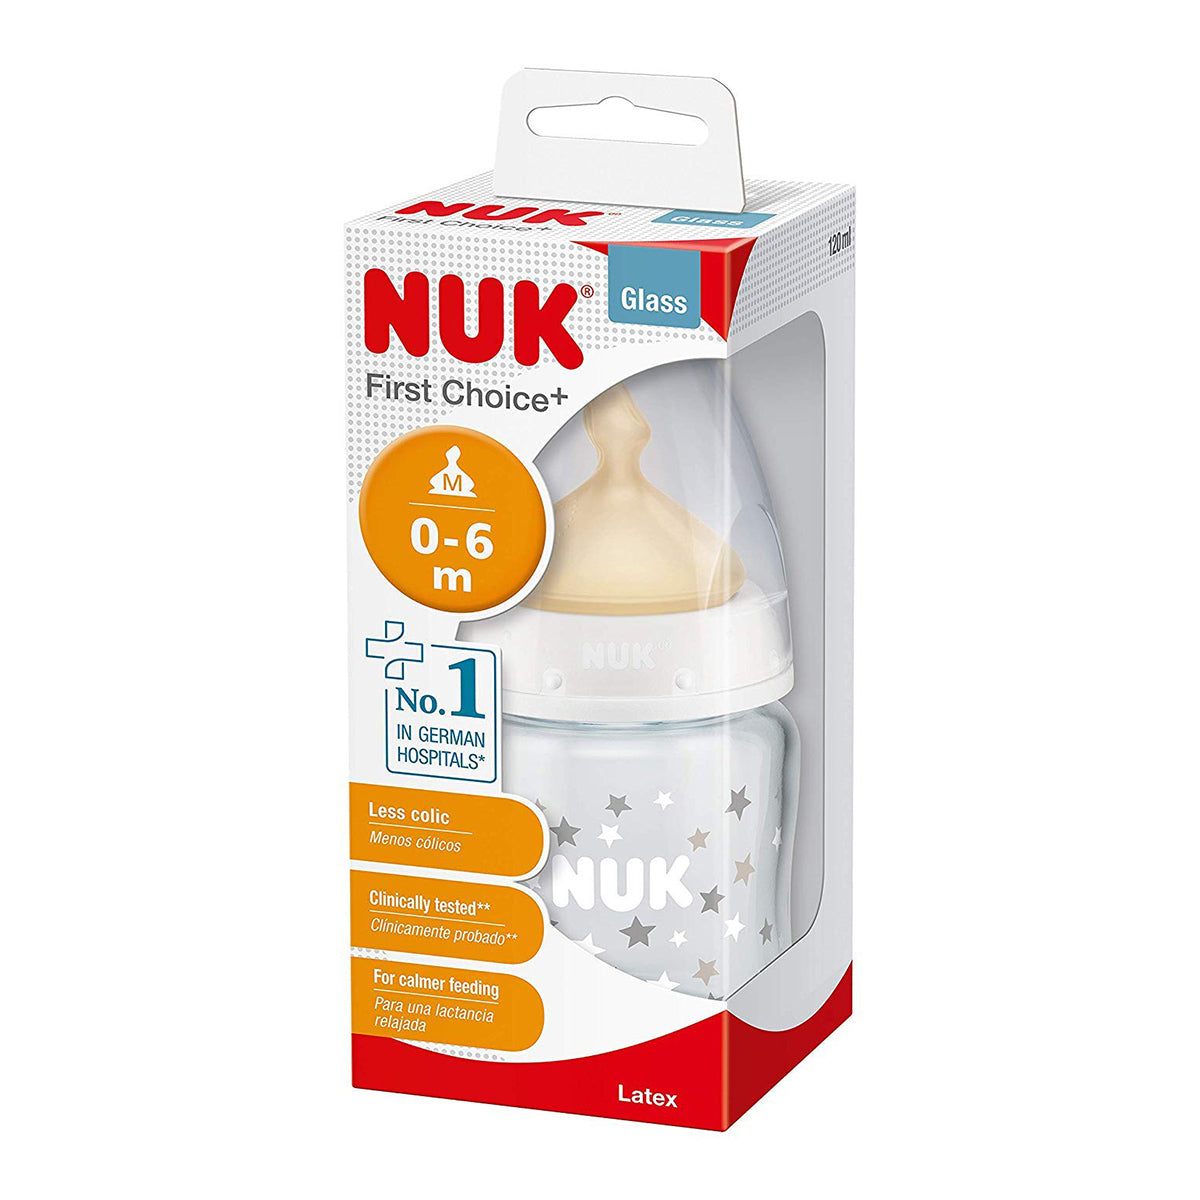 NUK First Choice + Glass Feeding Bottle 120ml with Latex Teat in Pakistan